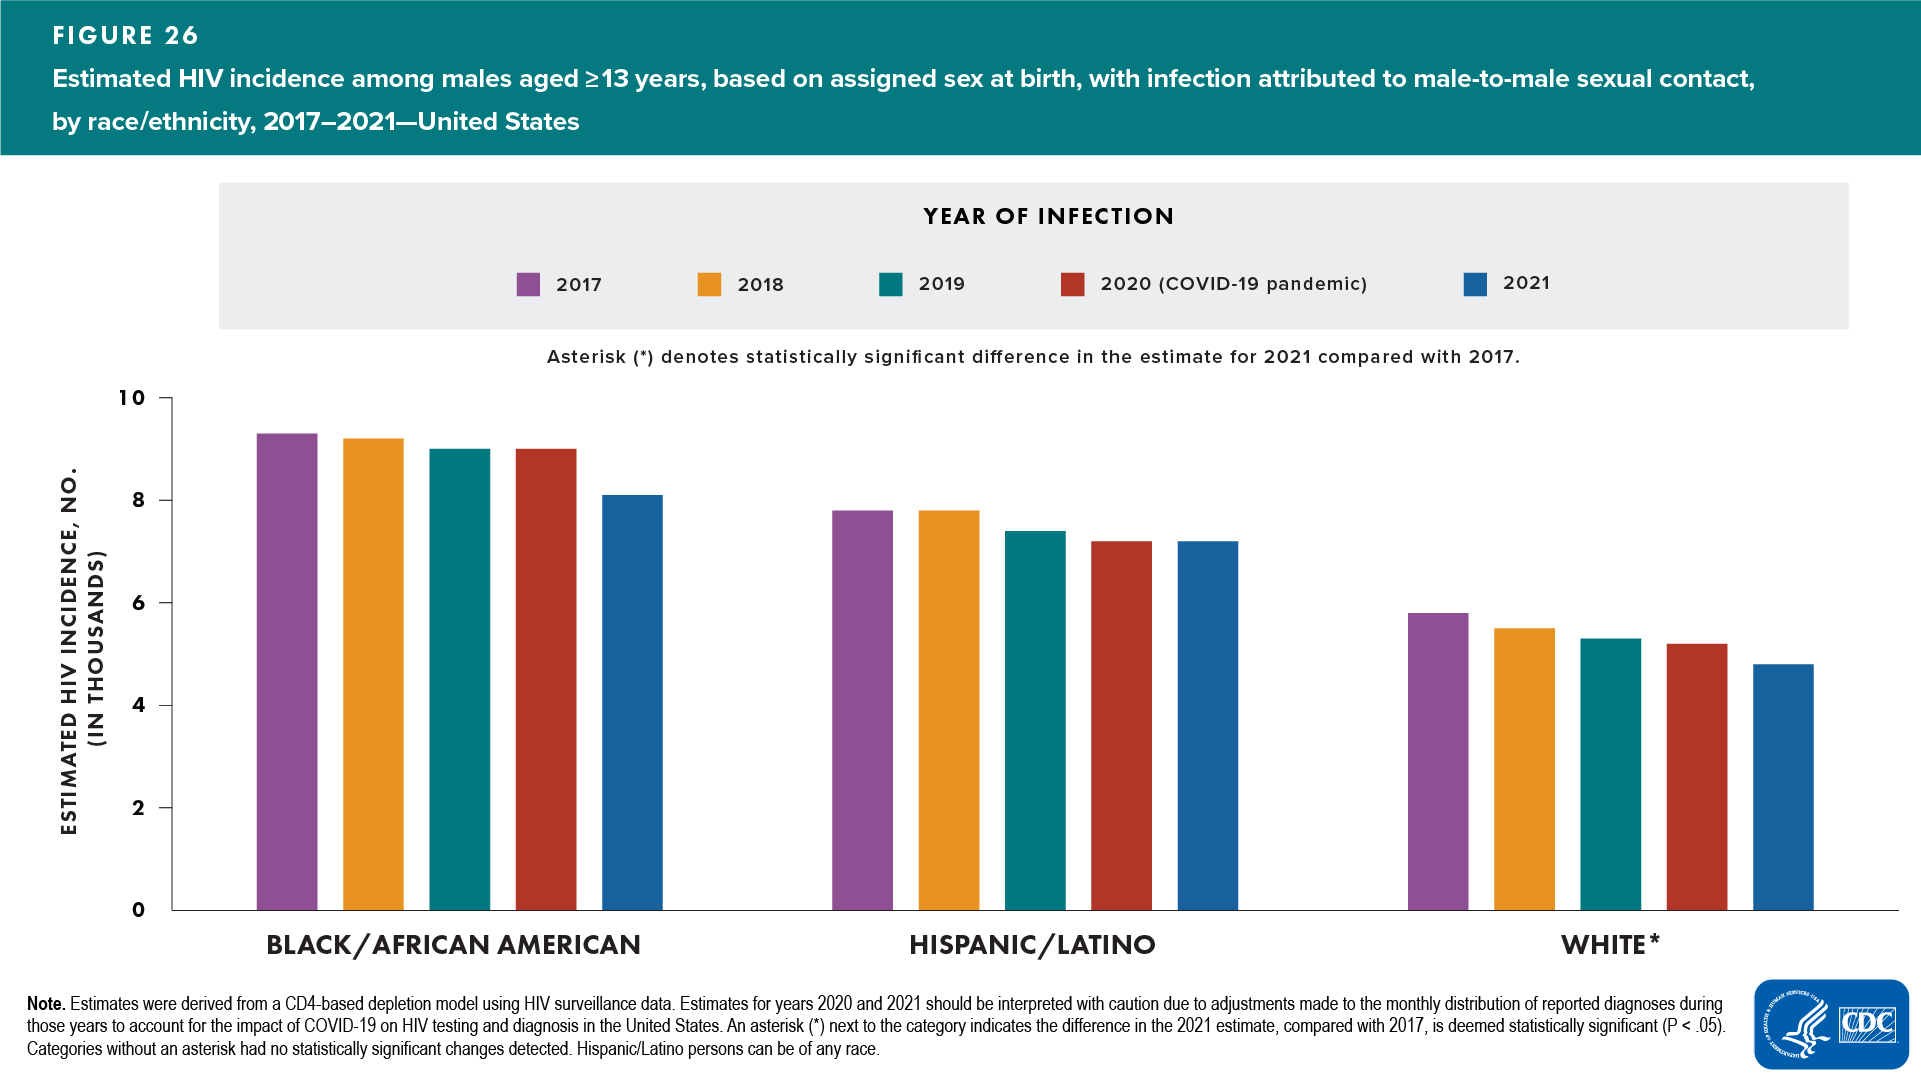 Figure 26. Estimated HIV incidence among males aged ≥13 years, based on assigned sex at birth, with infection attributed to male-to-male sexual contact, by race/ethnicity, 2017–2021—United States